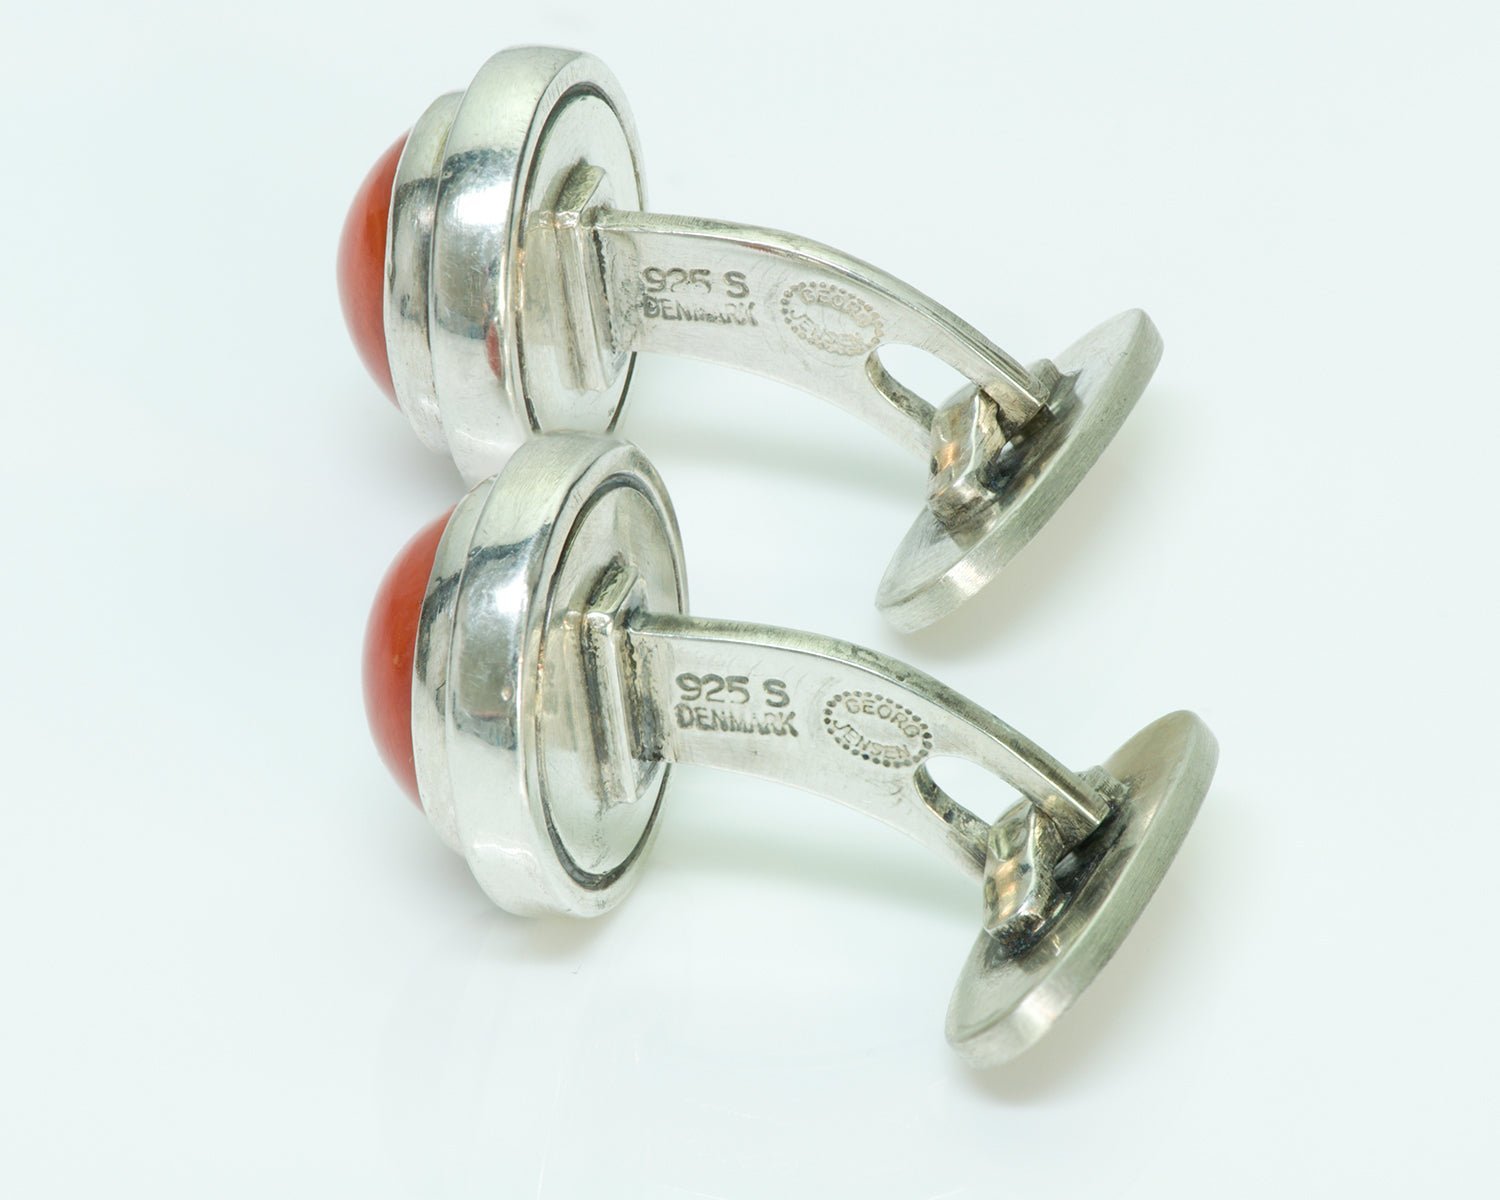 Georg Jensen Sterling Cufflinks Coral Cabochon No. 44D by Harald Nielsen